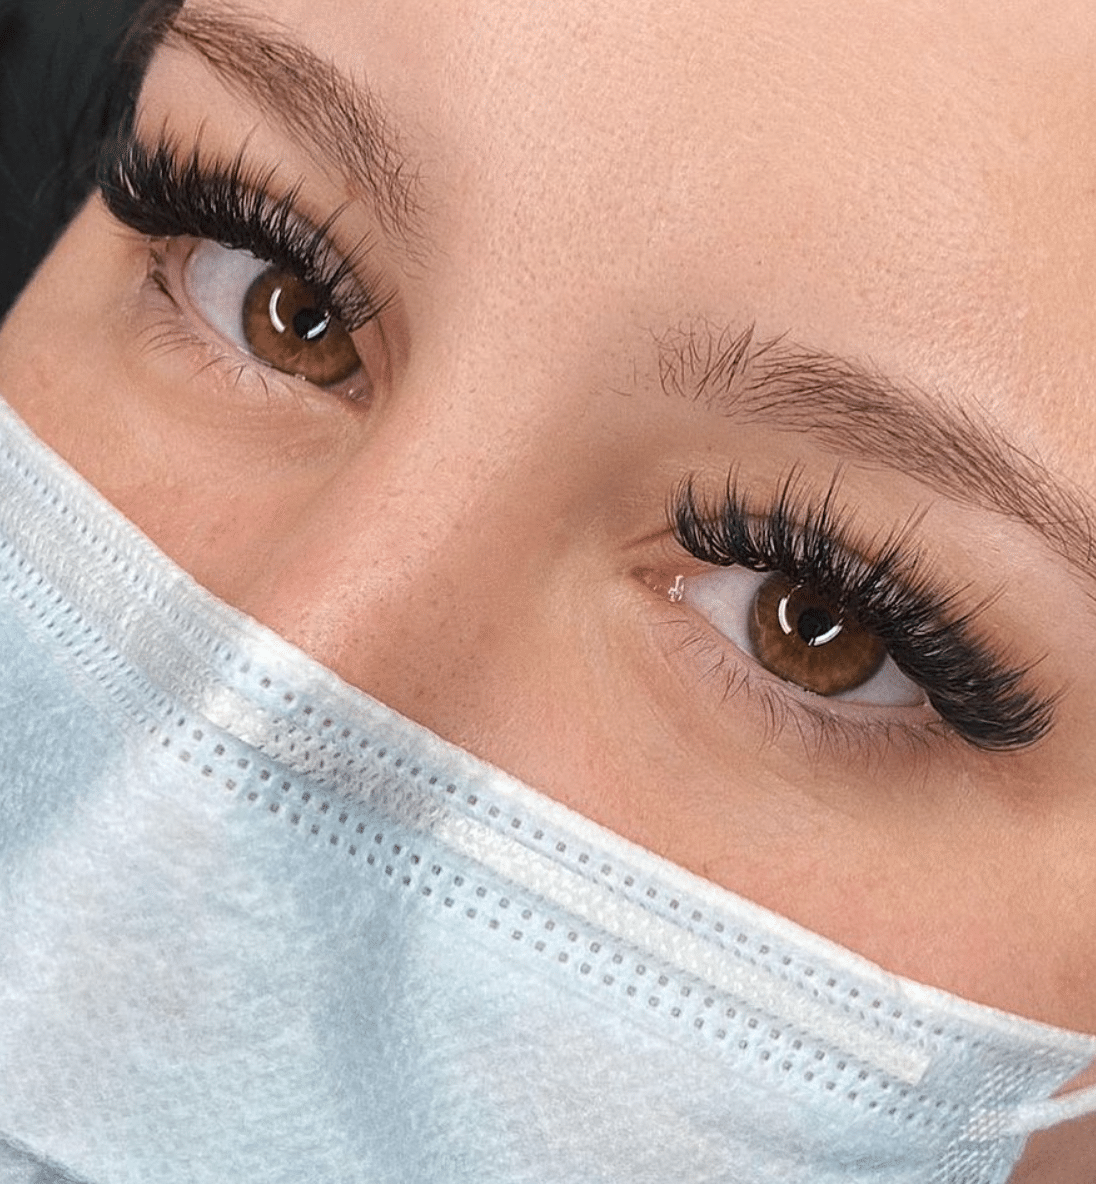 An Experts Guide To Getting The Lashes of Your Dreams